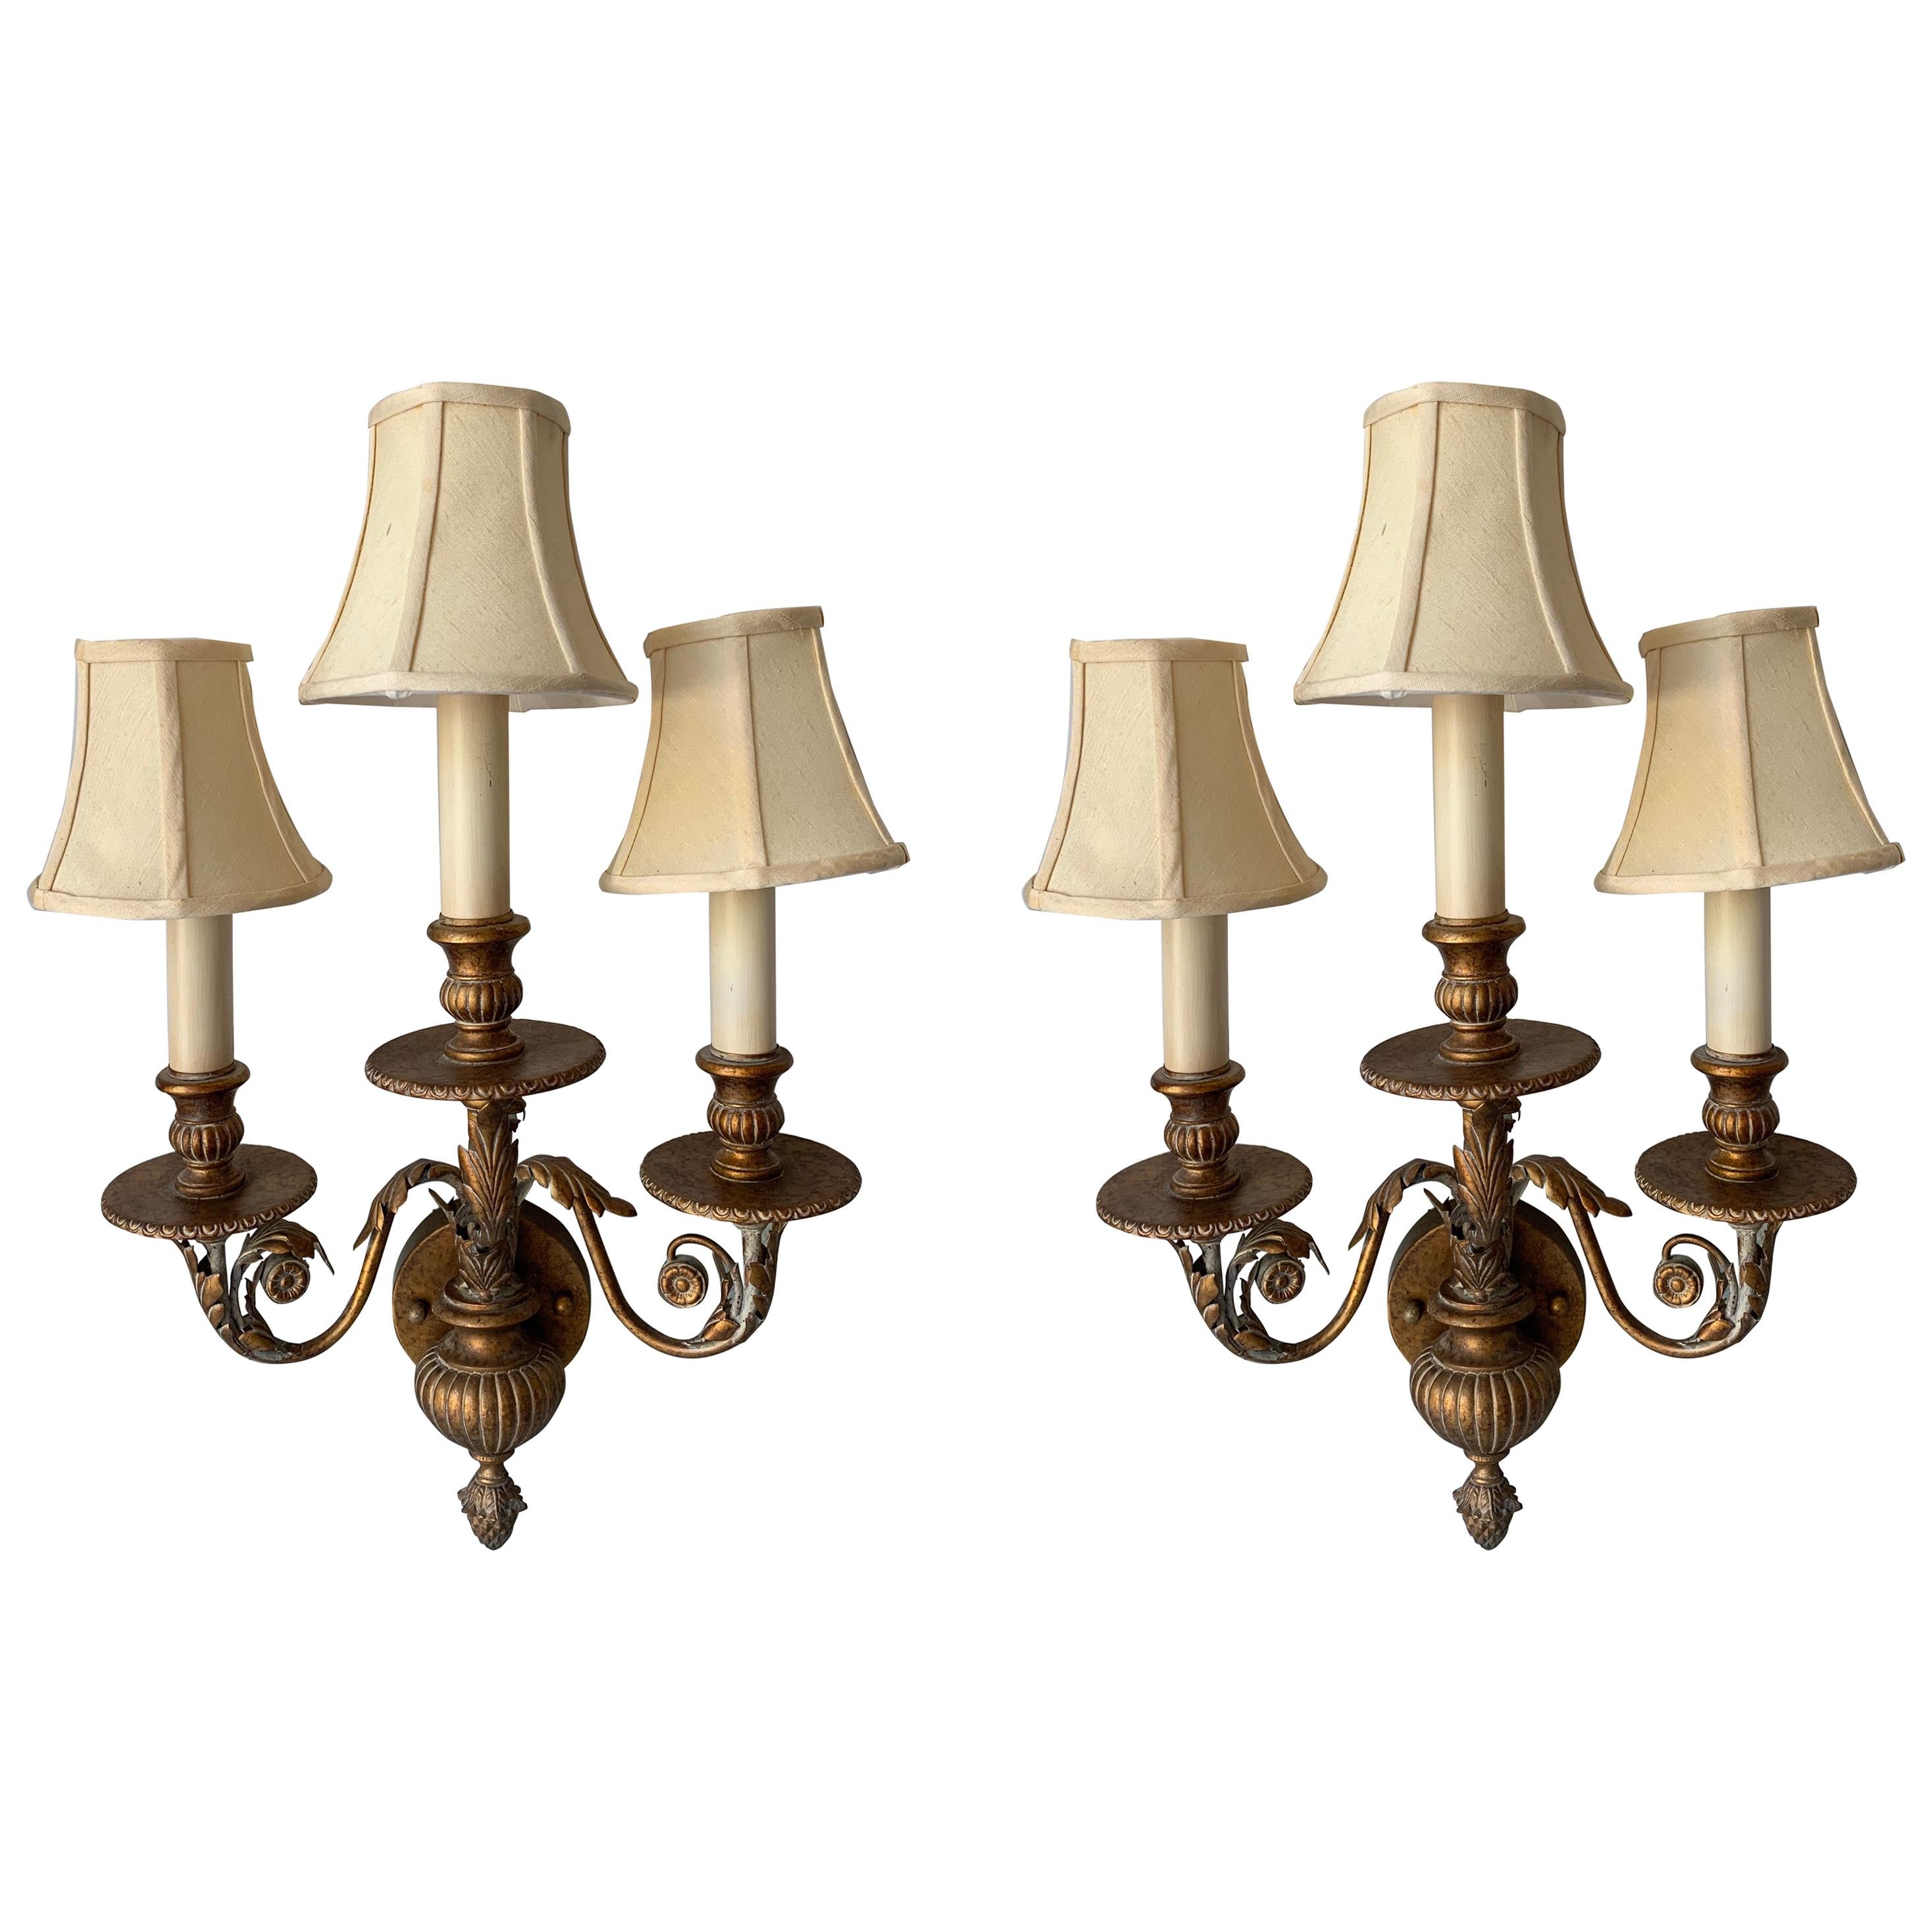 the Fine Arts Company 3-Arm Brass Sconces & Shades - a Pair